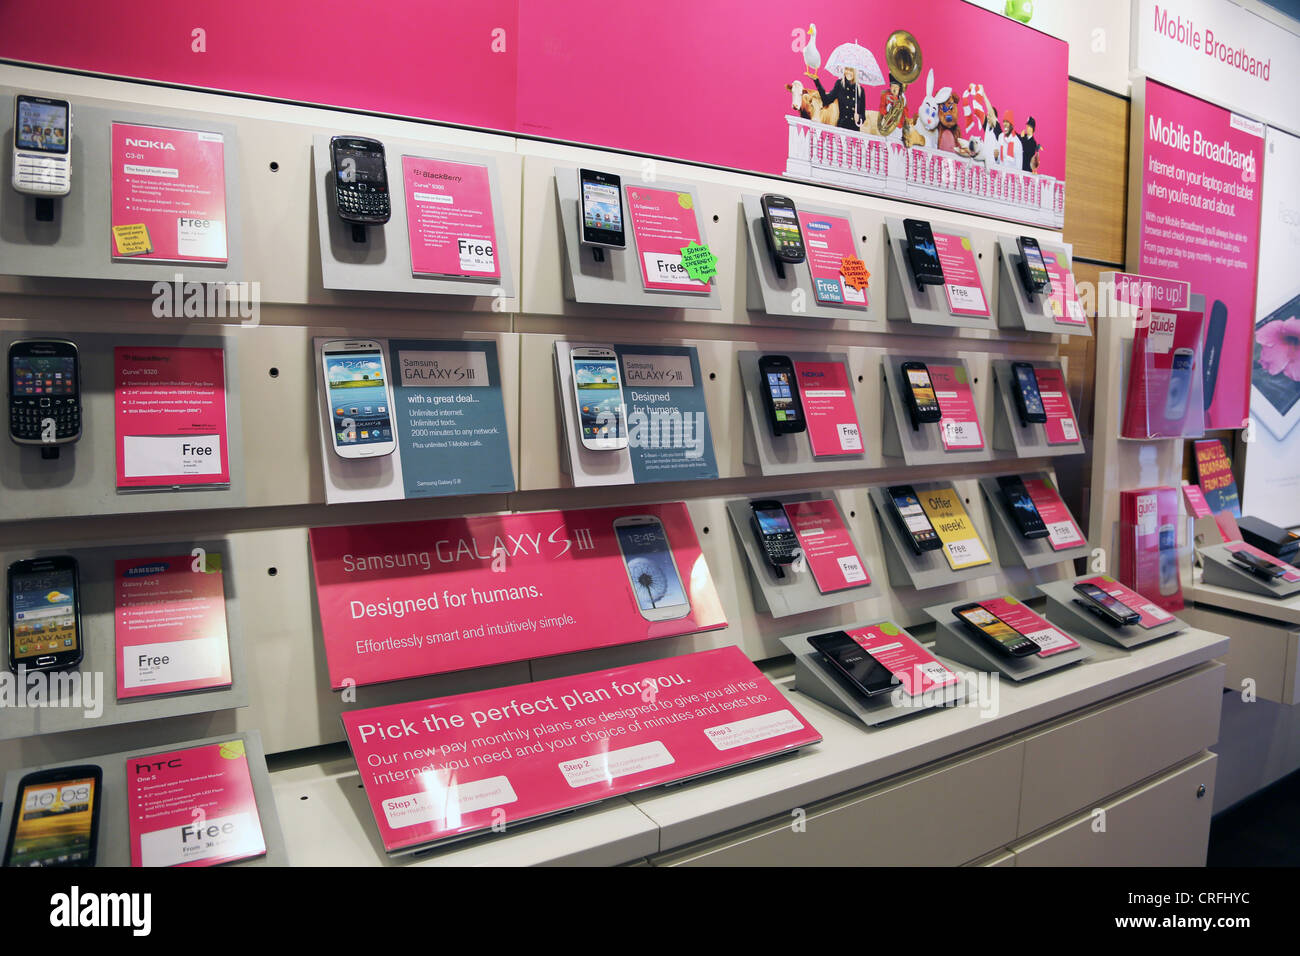 Mobile Phone Display In Mobile Phone Shop Surrey England Stock Photo - Alamy